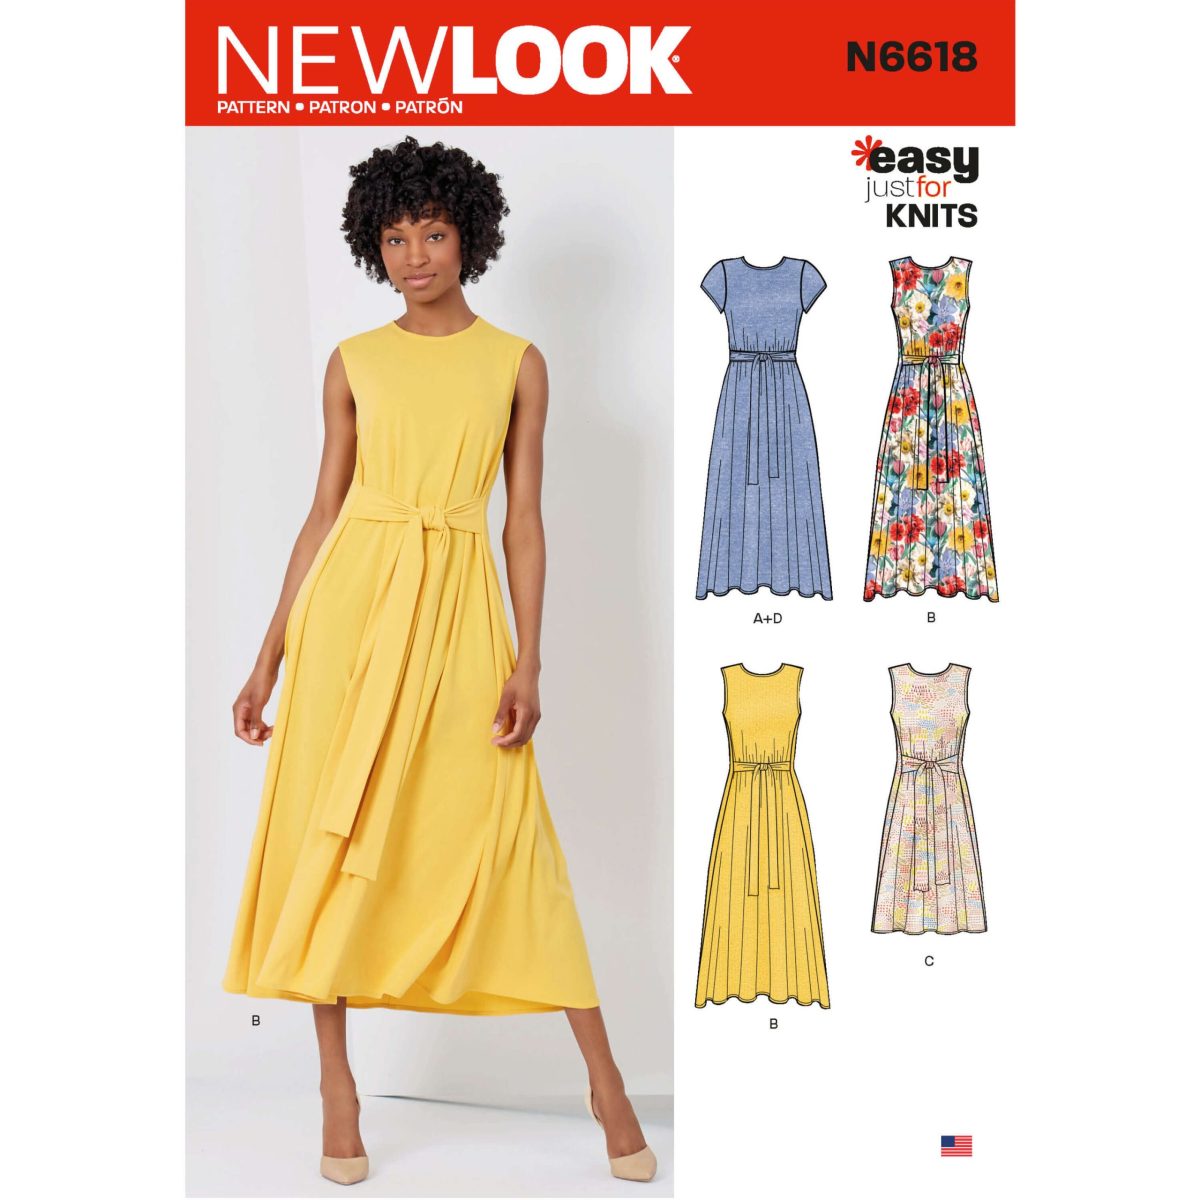 New Look Sewing Pattern N6618 Misses' Dresses In Two Lengths